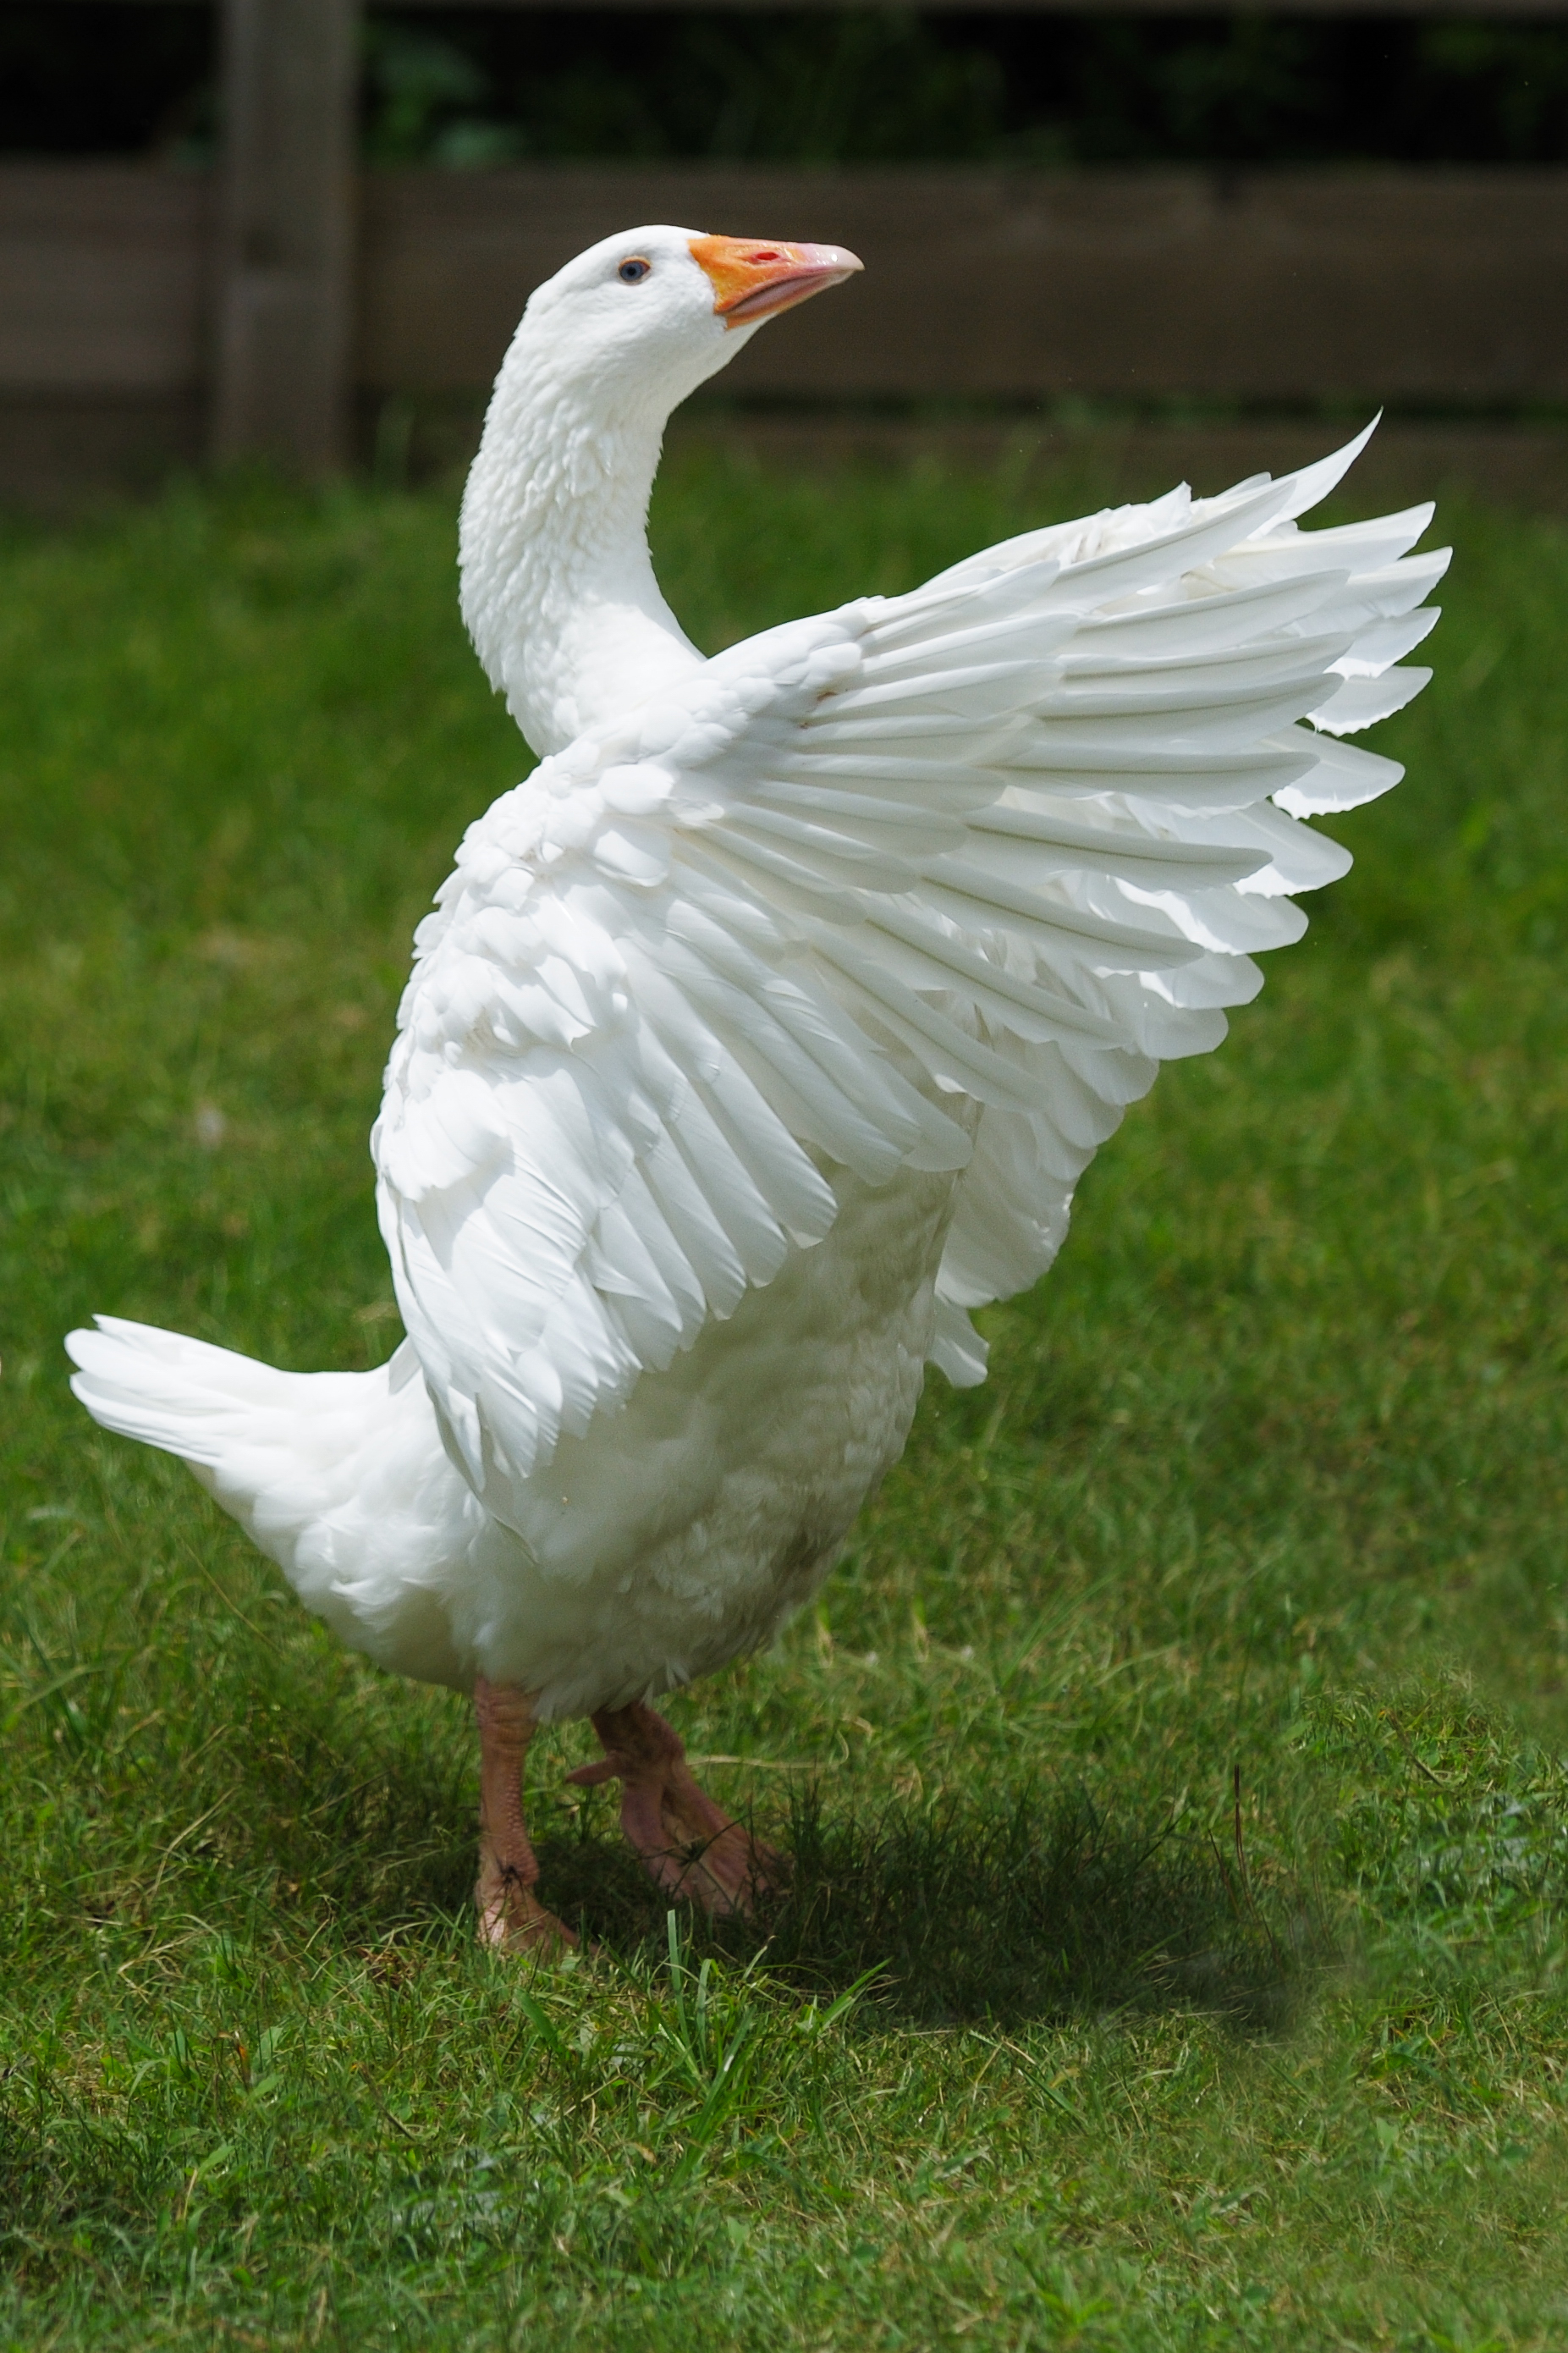 File:Embden goose at zoo.jpg - Wikimedia Commons